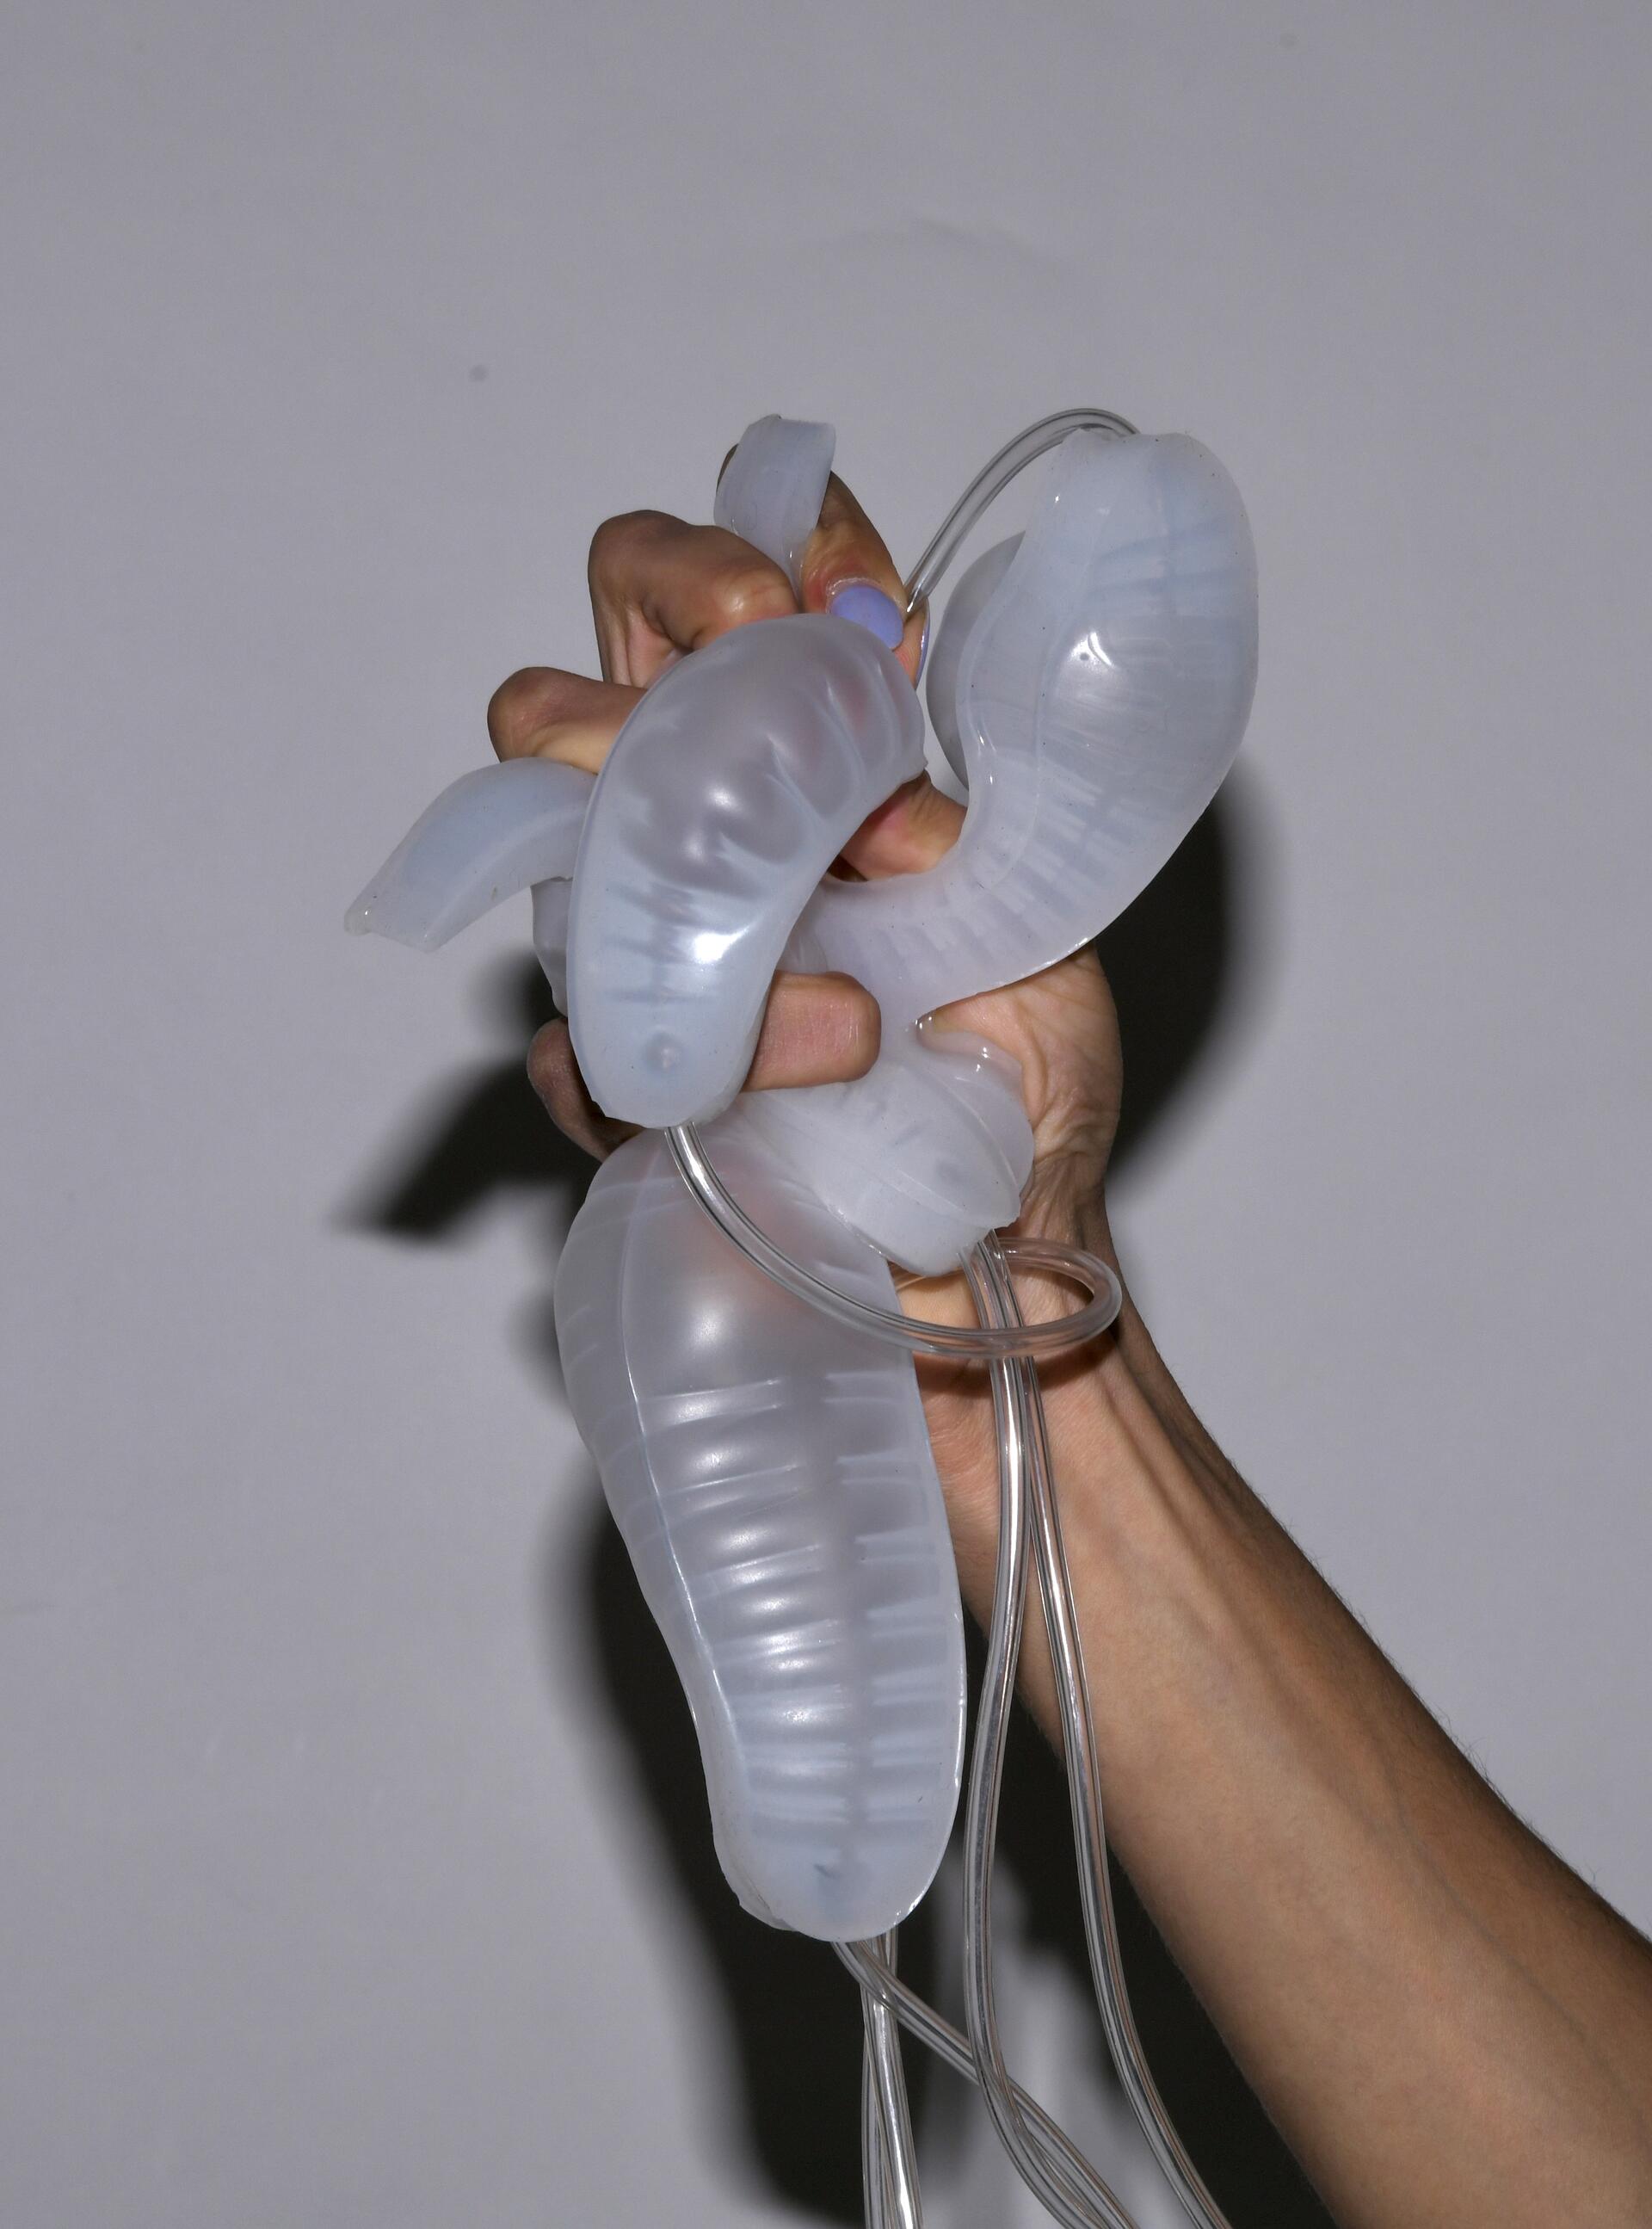 Image of the robotic entity, held by a hand. The object is ballooning.